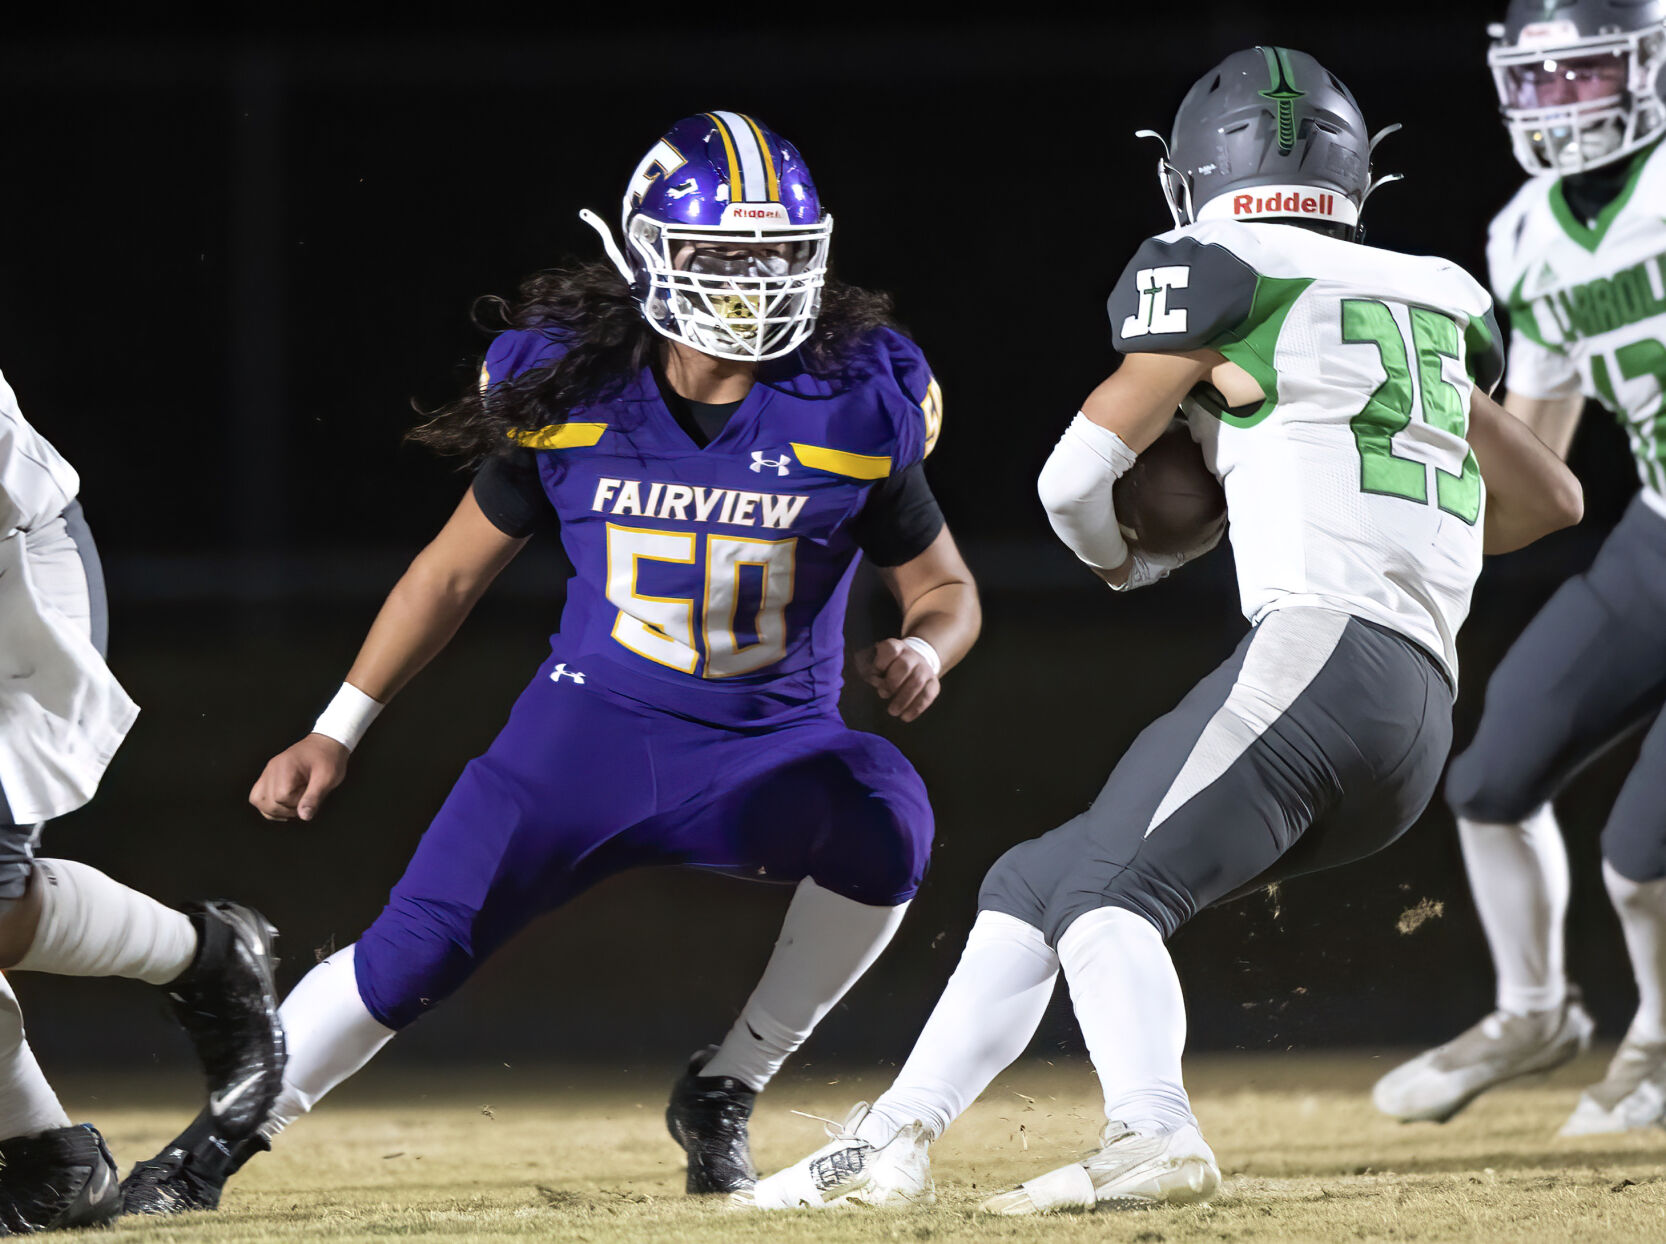 Fairview’s Eric Gonzalez Named Overall MVP on All-County Football Team, All-State Announcement Coming Soon